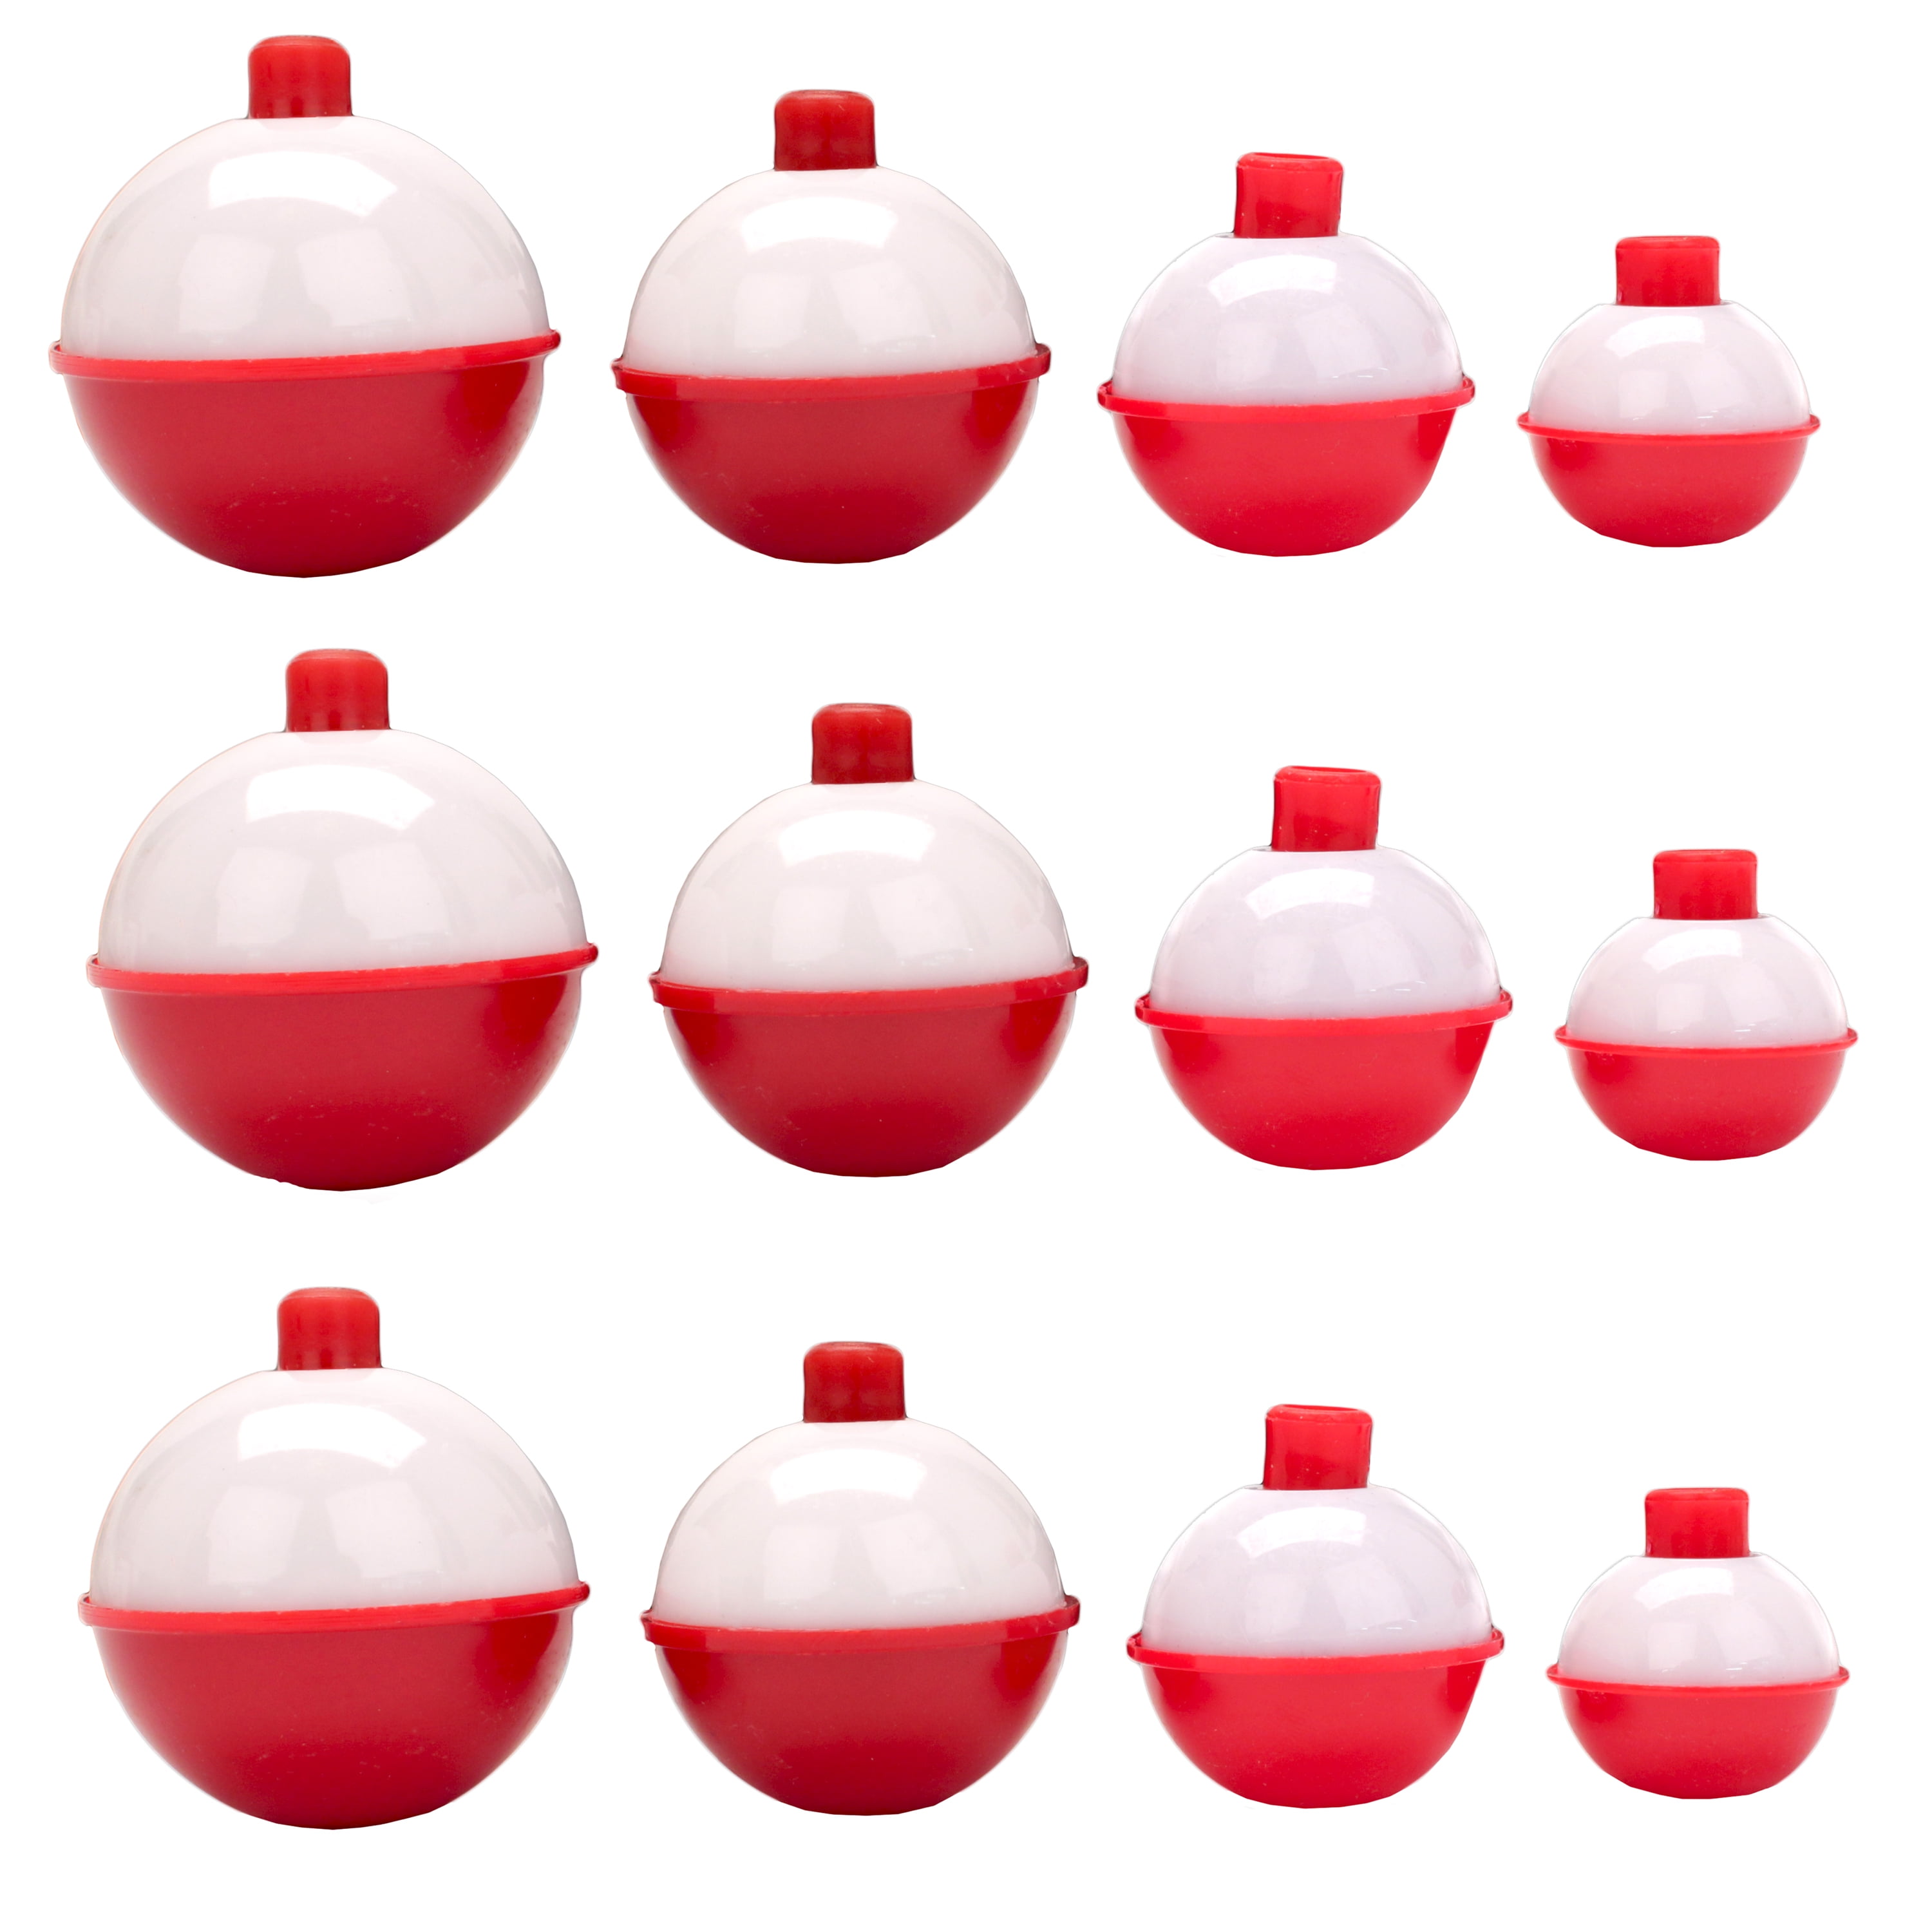 50 FISHING BOBBERS Round Floats 1-3/4" RED/WHITE SNAP ON FREE US SHIP #07120-005 